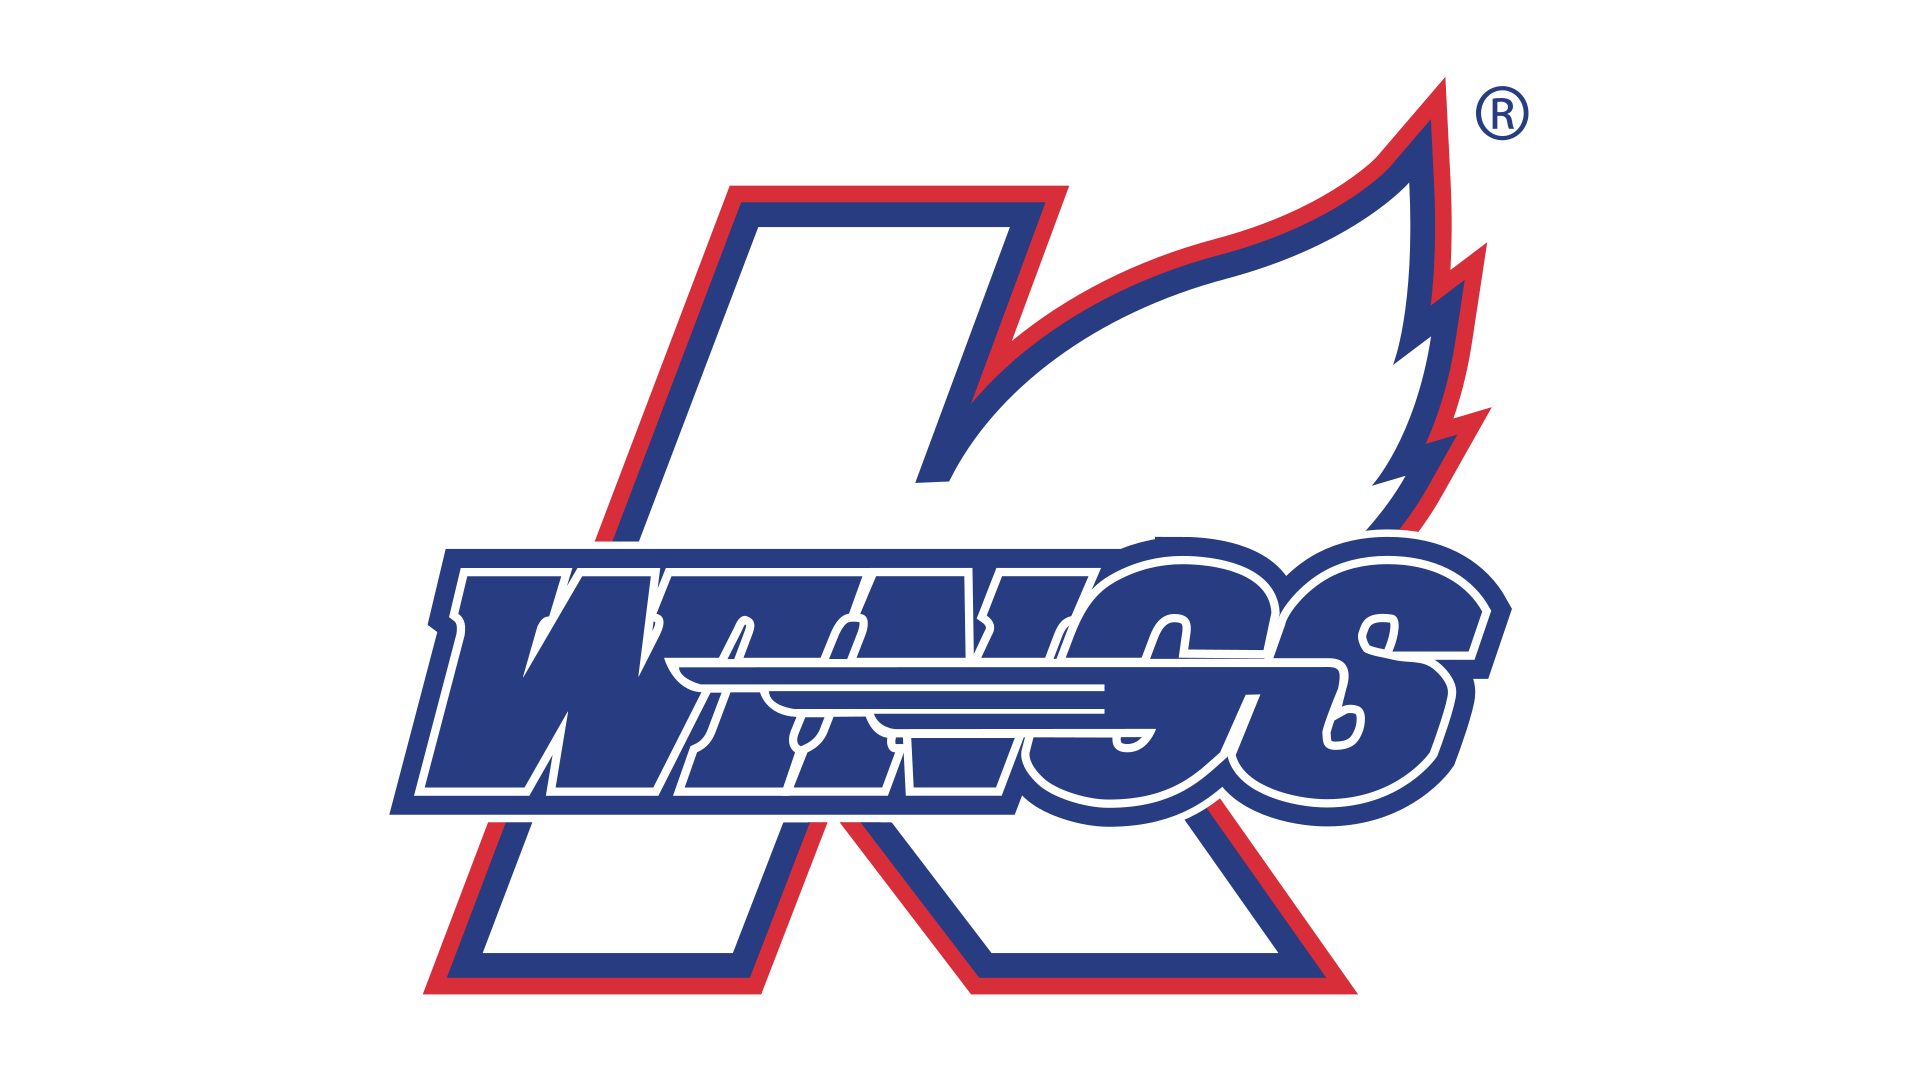 Wings as Logo - Kalamazoo Wings logo, Kalamazoo Wings Symbol, Meaning, History